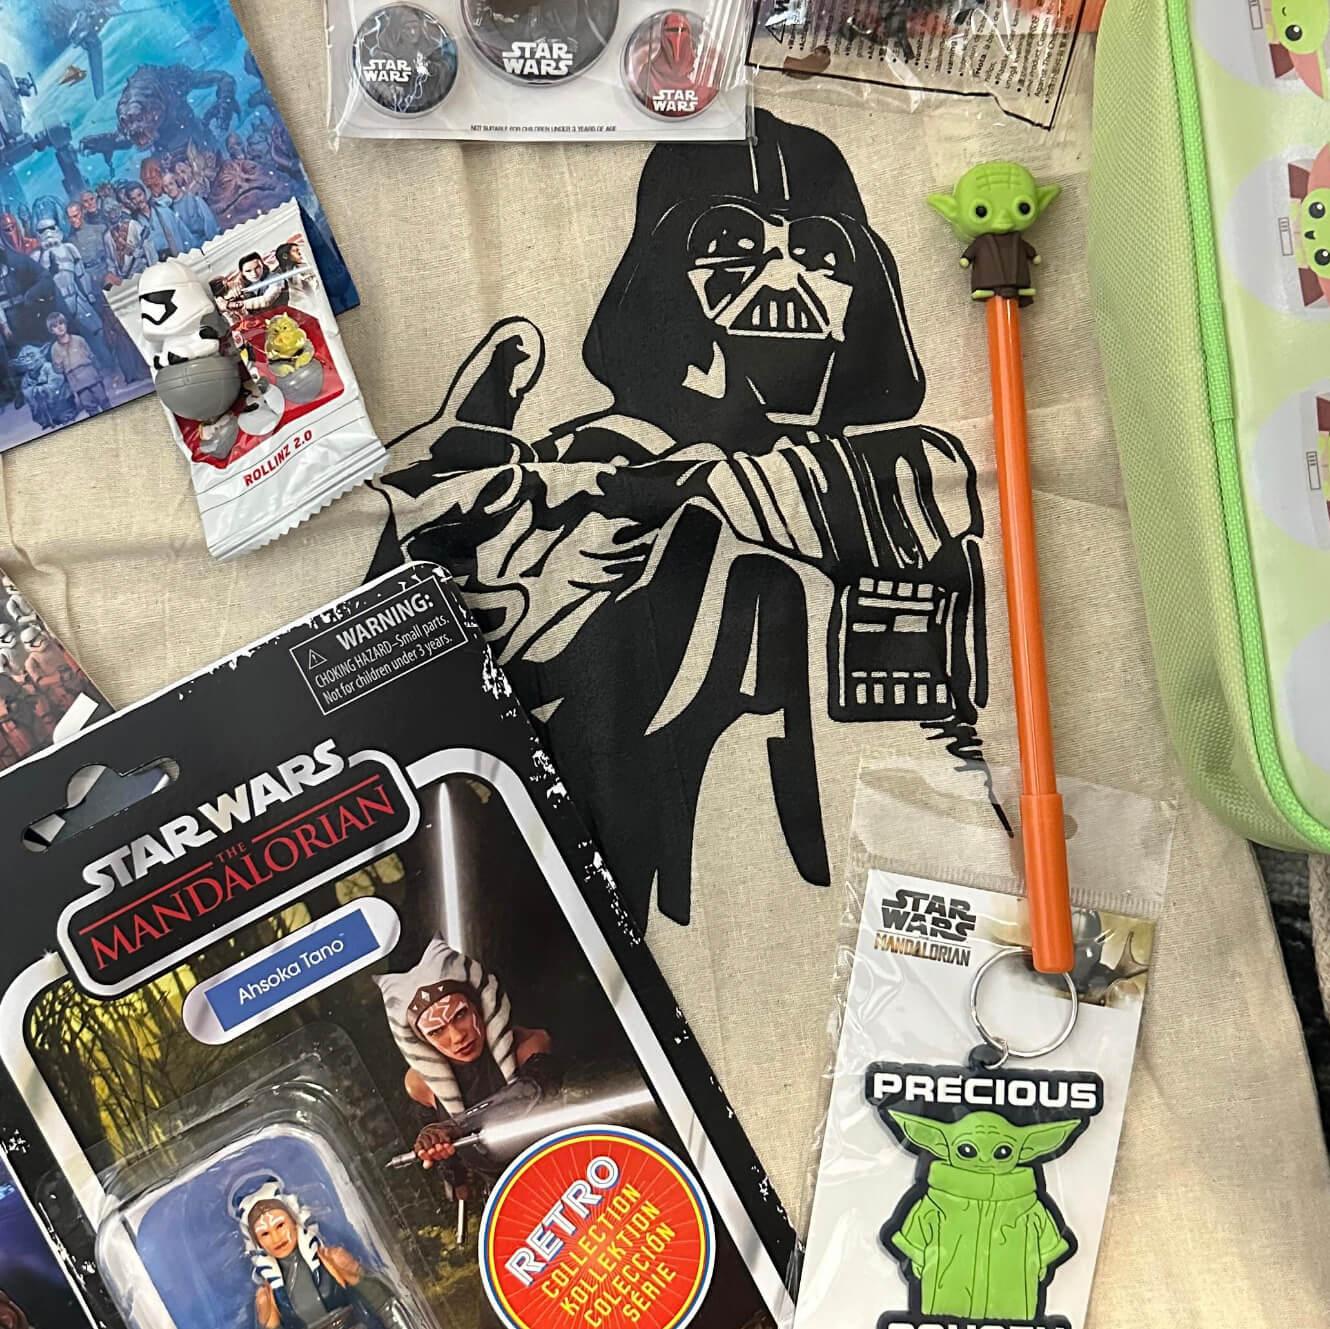 Star Wars Mystery Gift Box  Relinquish all the responsibility of gift  giving!